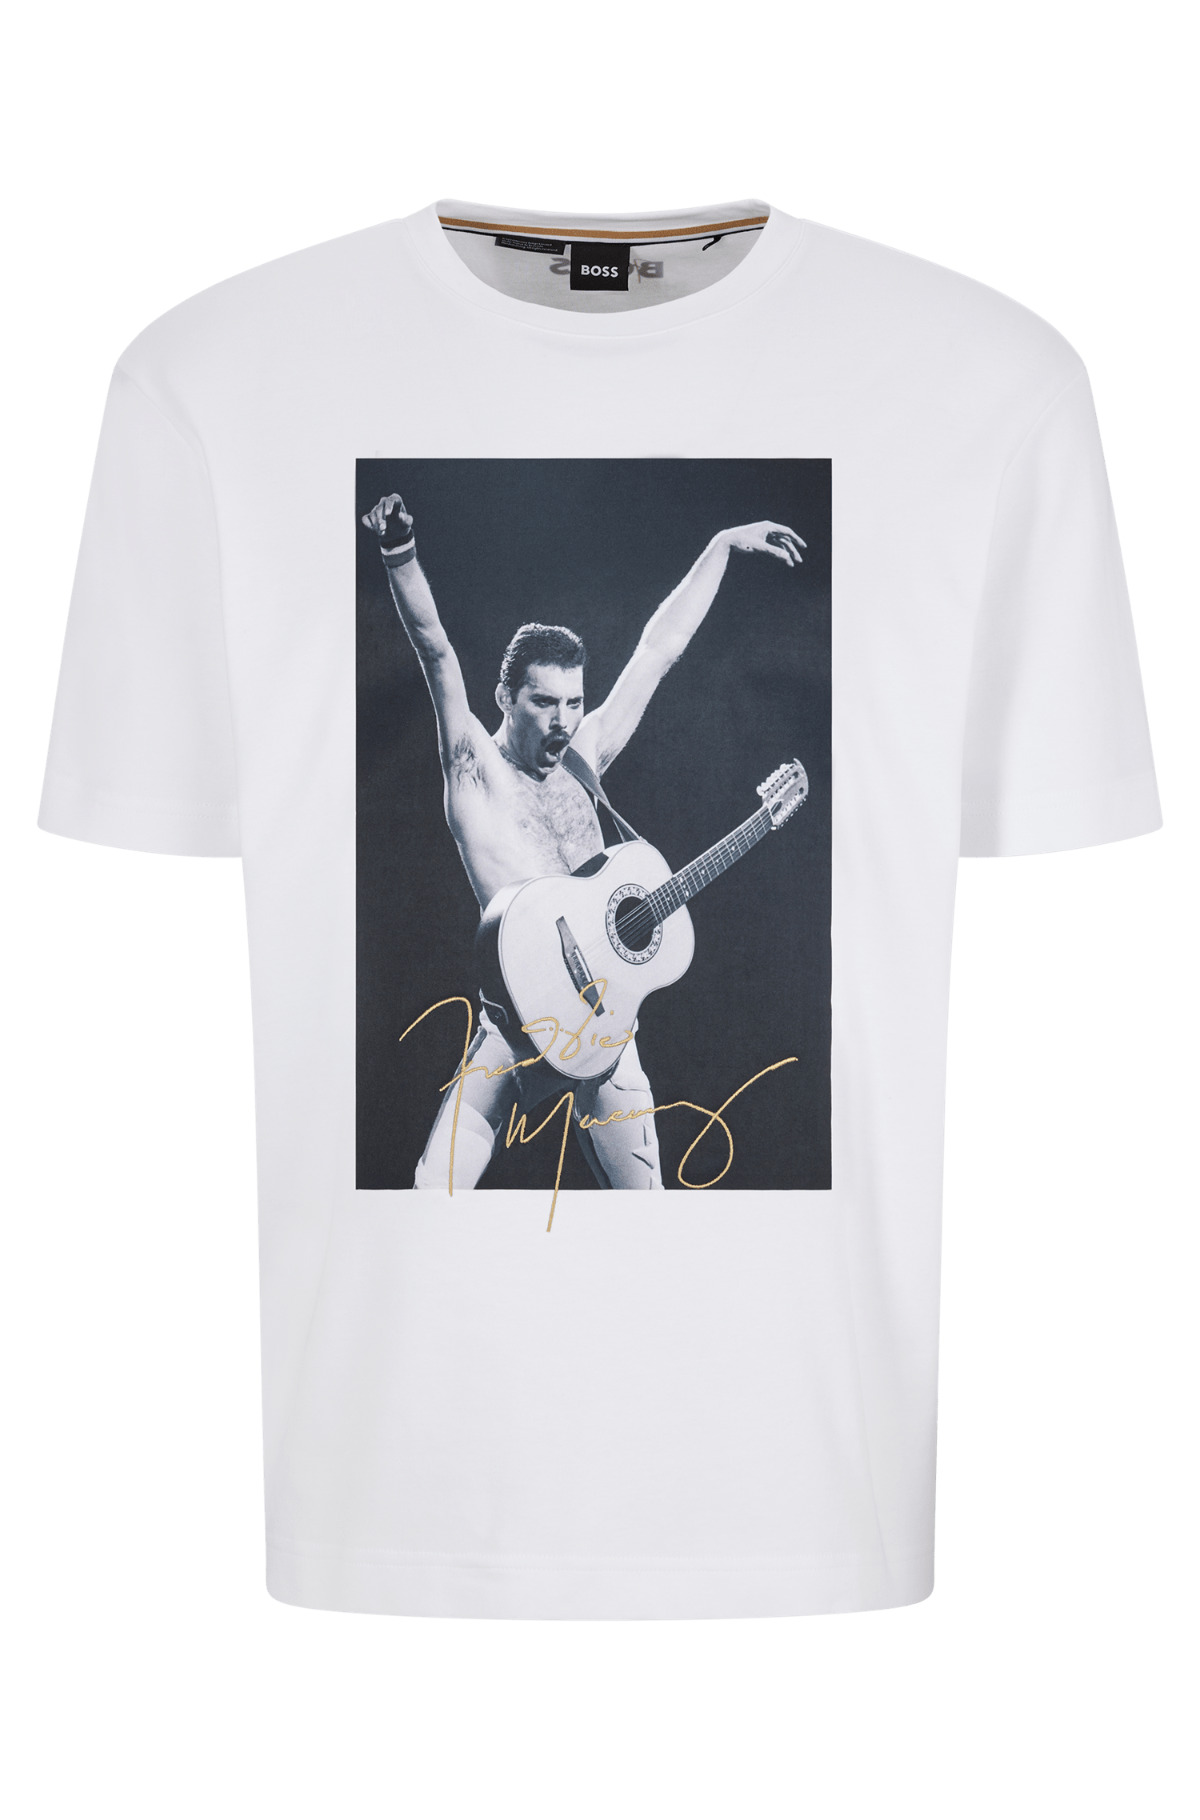 Unapologetically BOSS: A New Capsule Collection Inspired By The Legendary Freddie Mercury